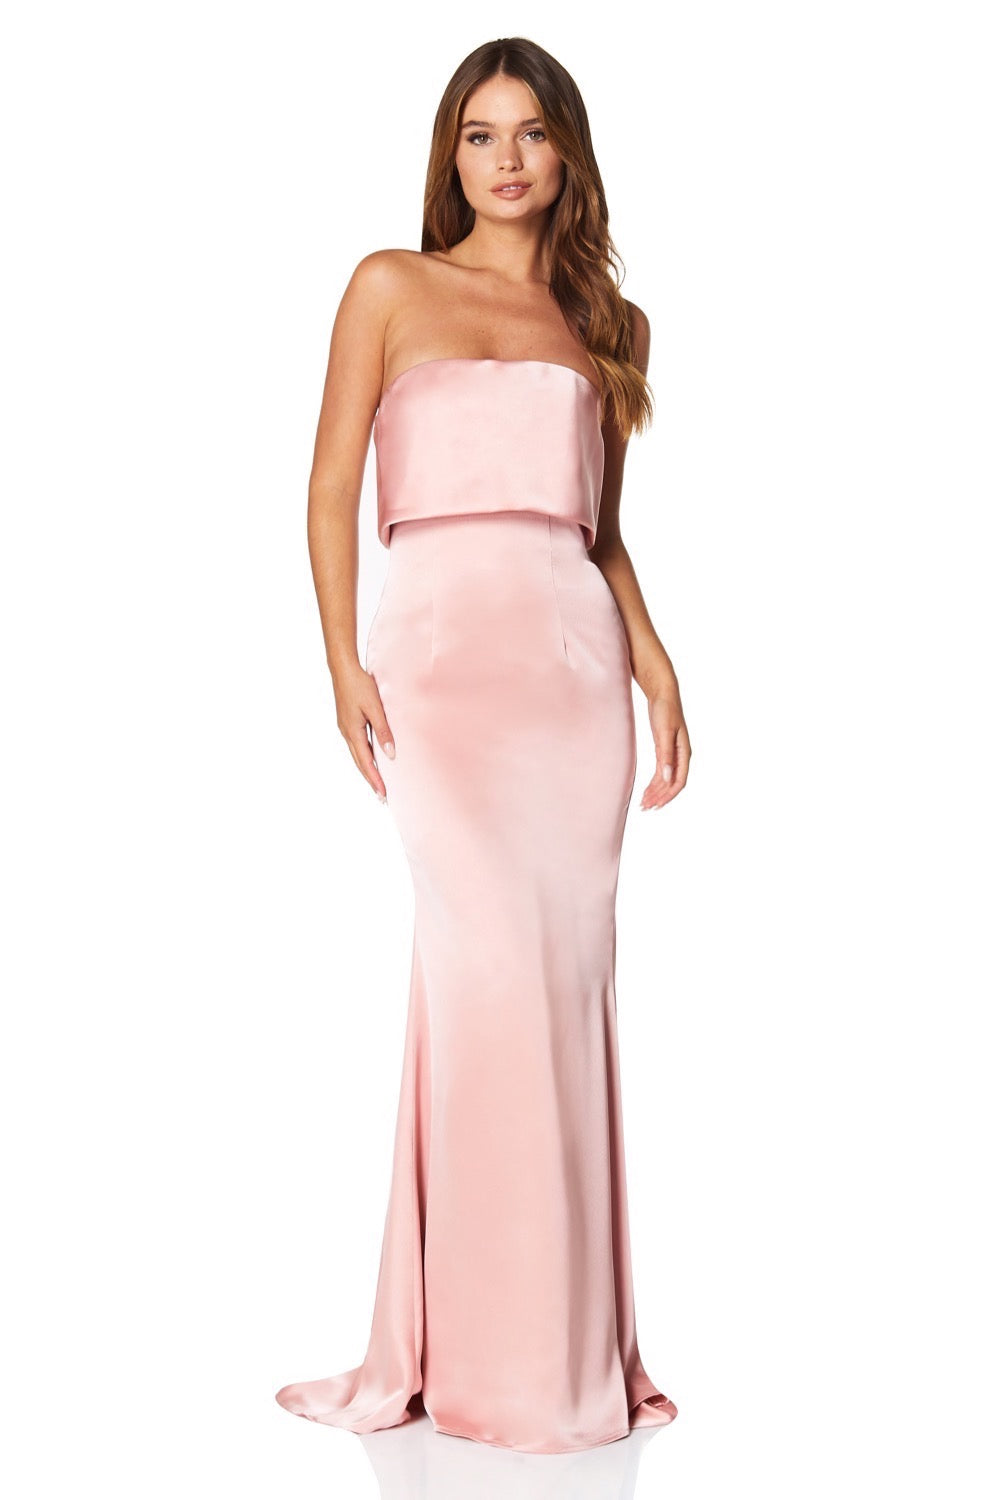 Jetaime Strapless Maxi Dress with Overlay and Button Back Detail, UK 16 / US 12 / EU 44 / Blush